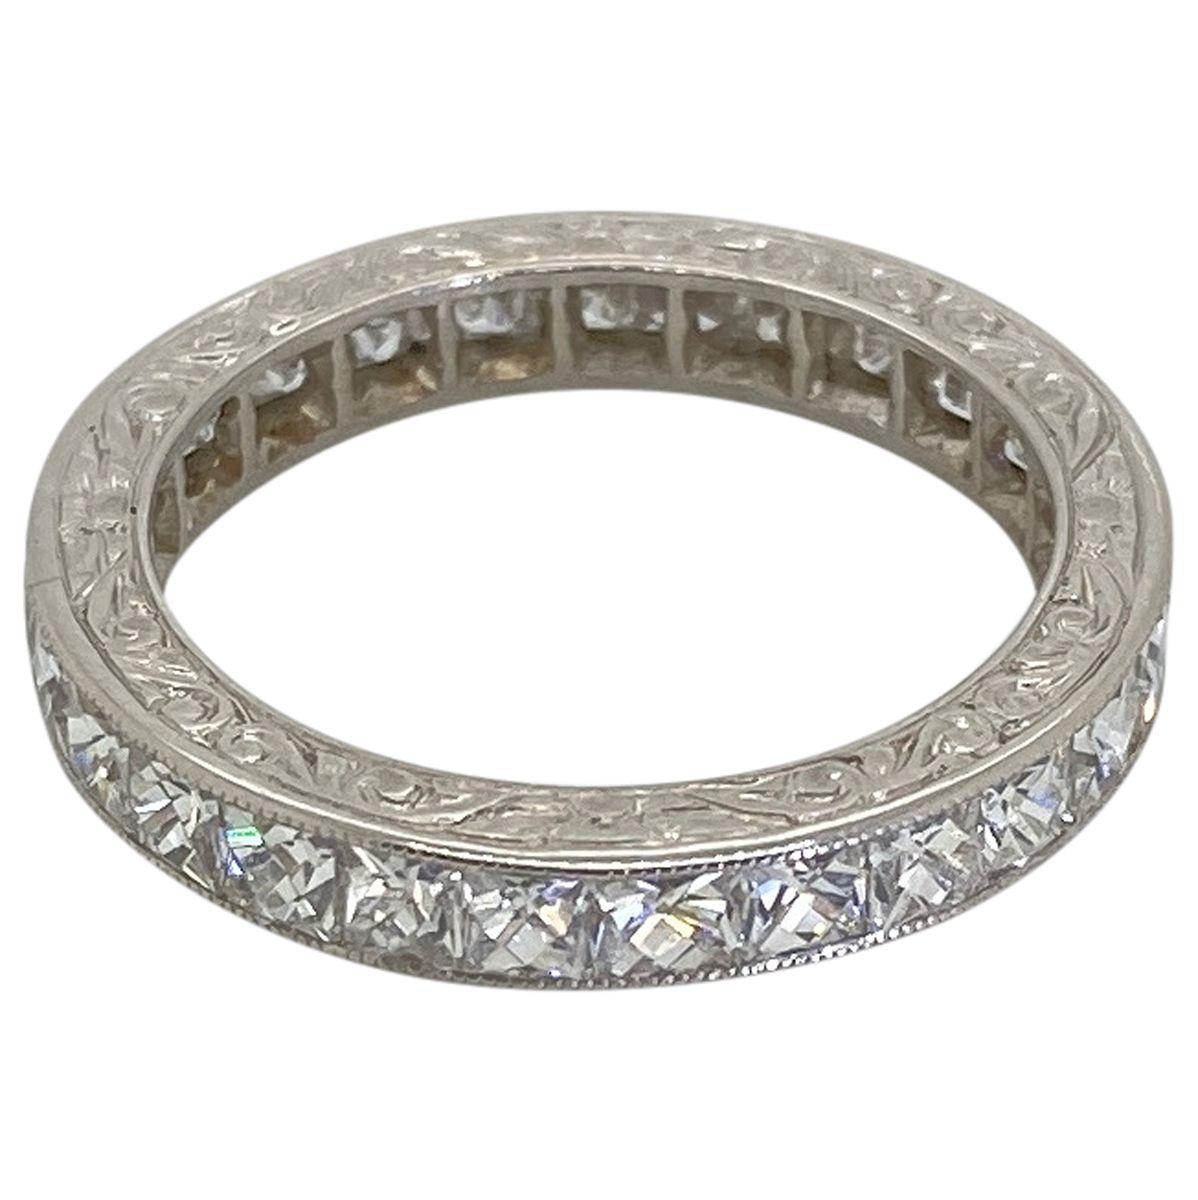 Art Deco French Cut Diamond and Platinum Eternity Band Ring